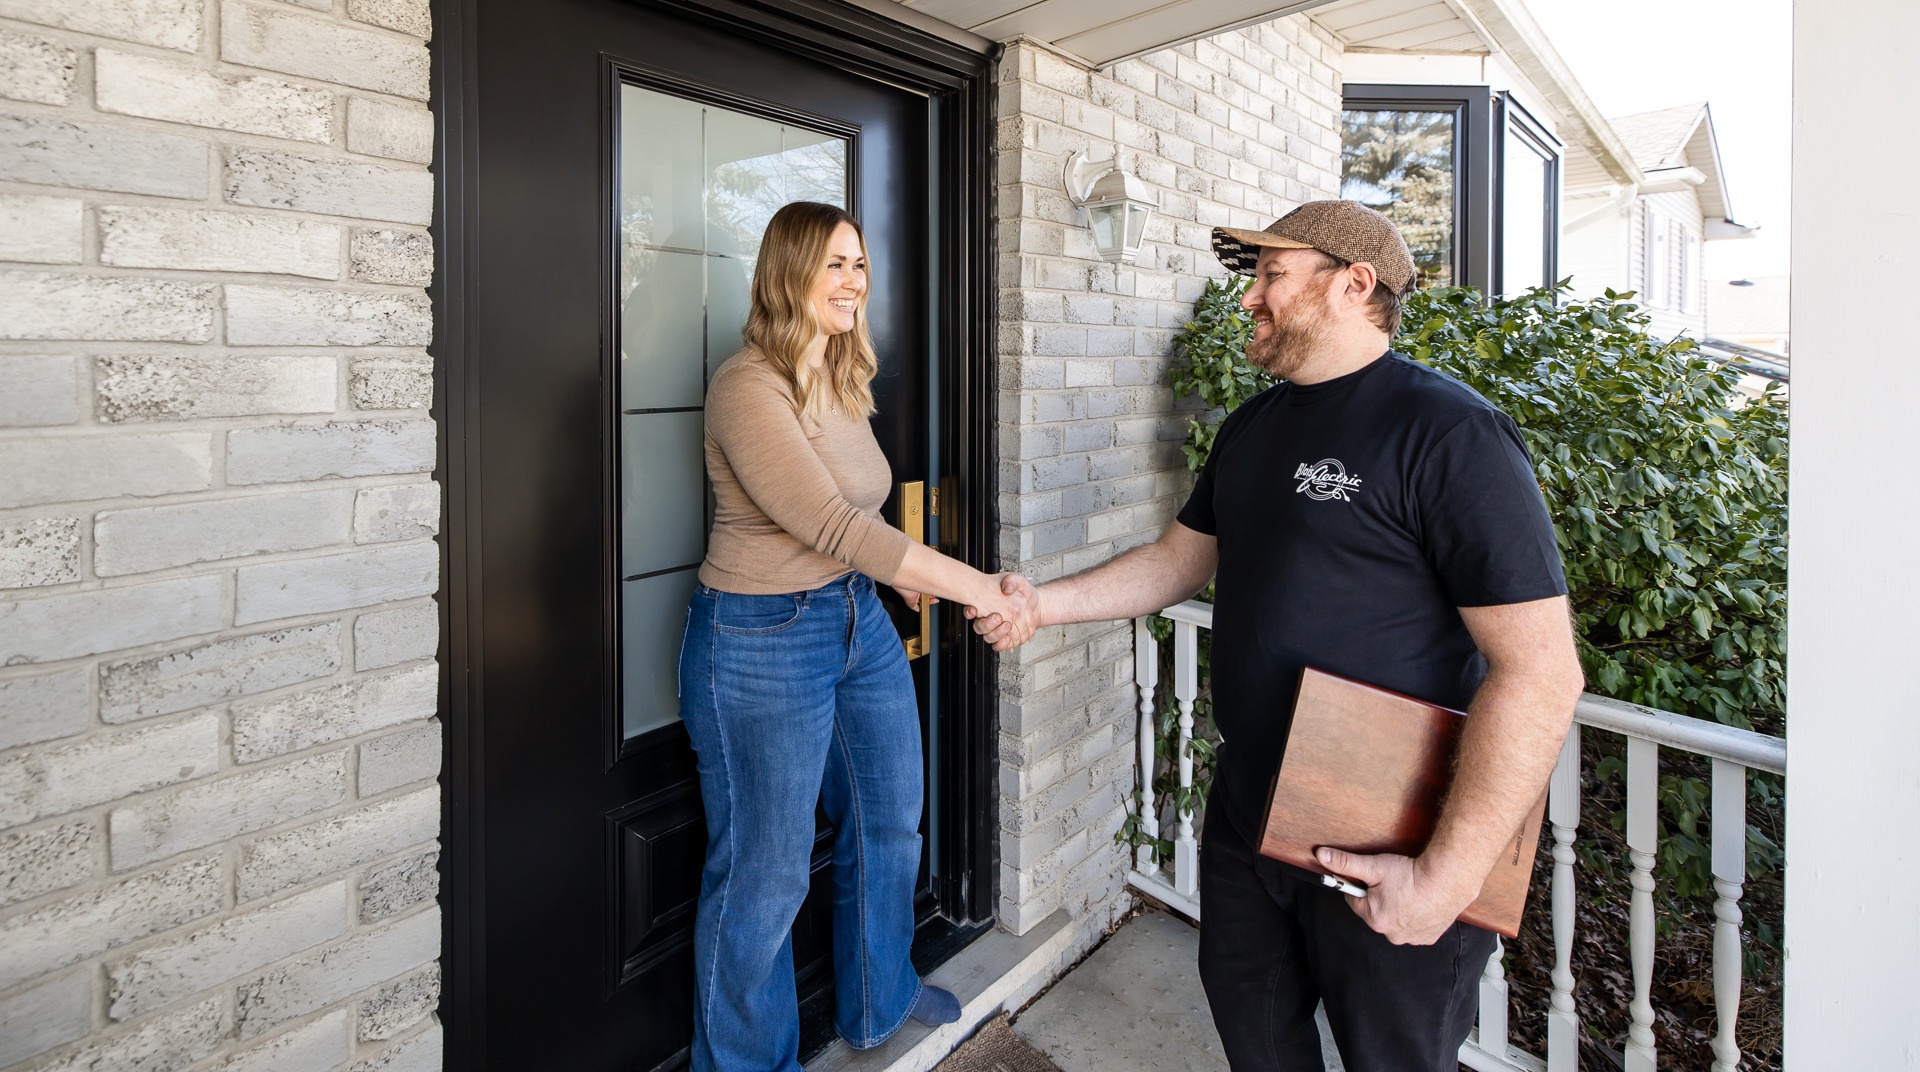 A person holding a clipboard is shaking hands with another person at a residential entrance, both are smiling, suggesting a positive interaction.